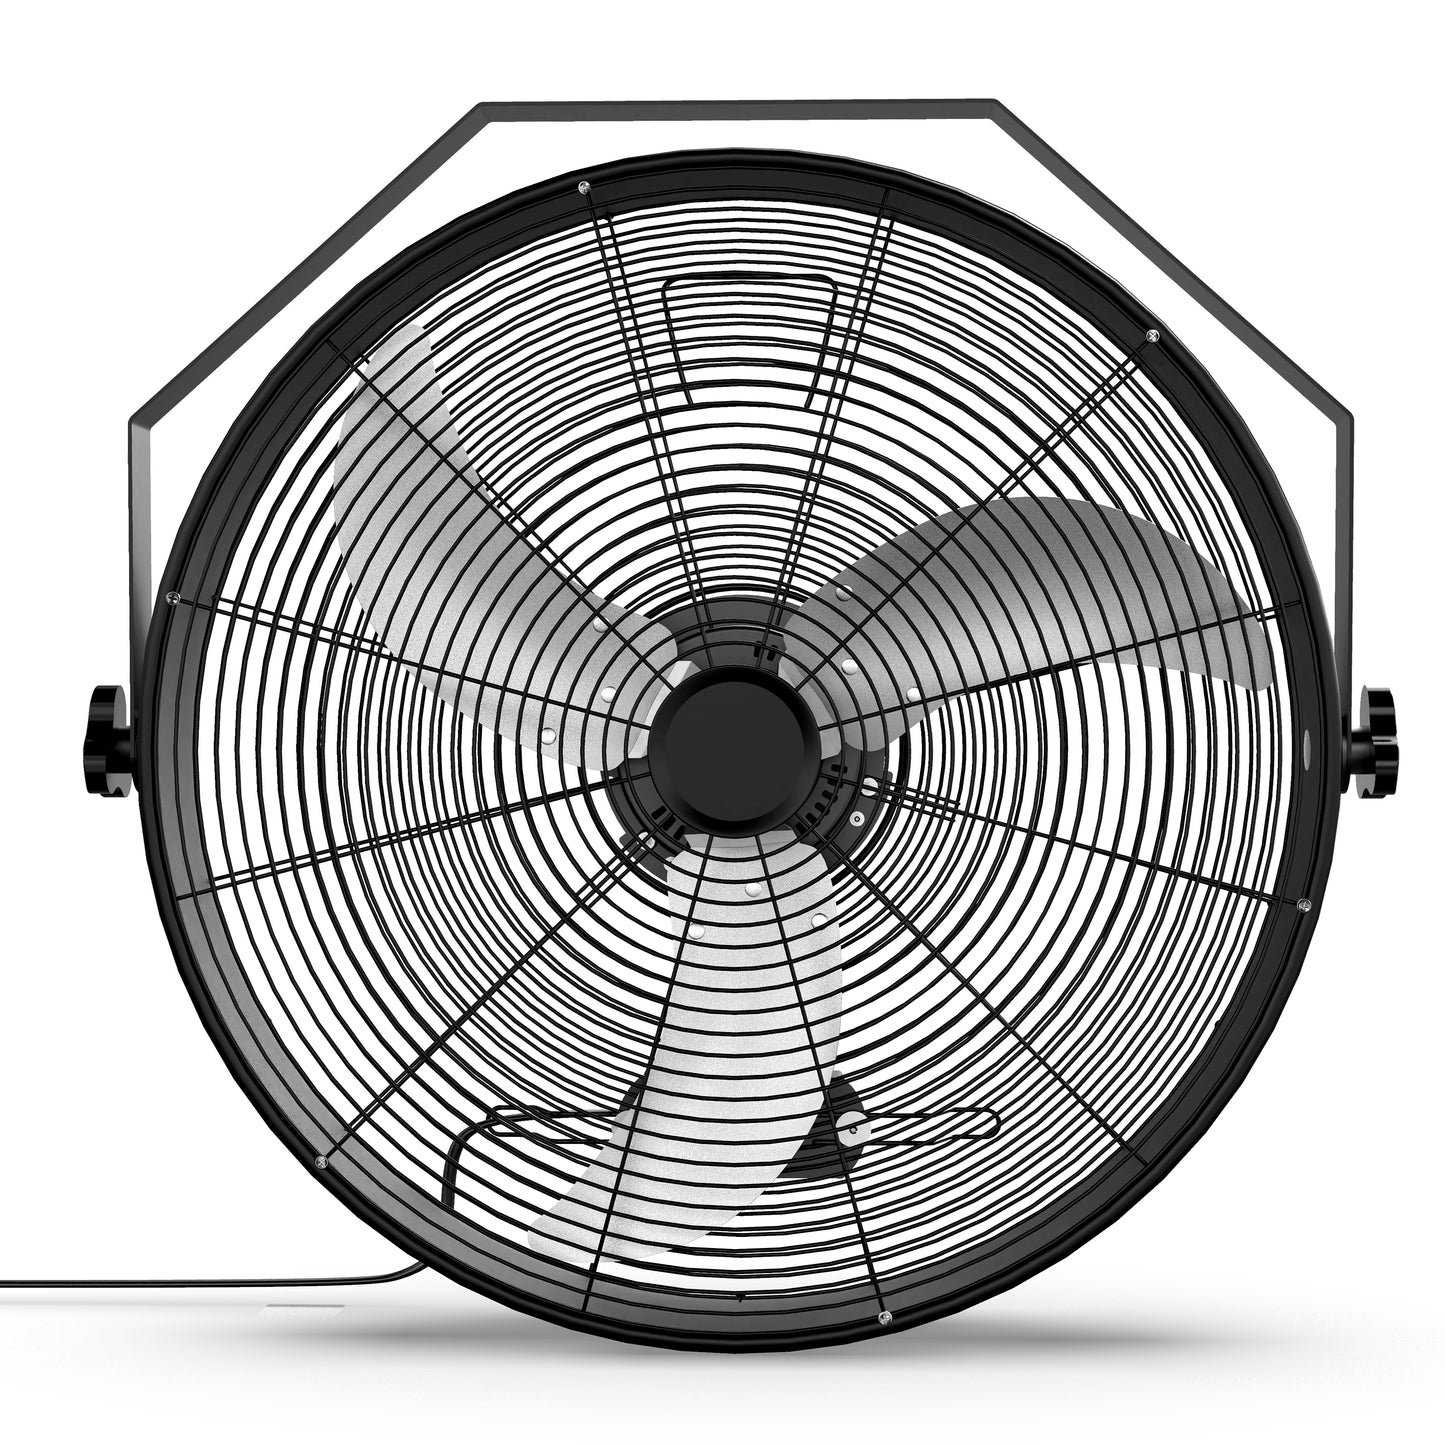 InfiniPower 18 Inch High Velocity Wall Mount Fan with Rack, 3 Speed Industrial/Commercial Metal Ventilation Fan MLNshops